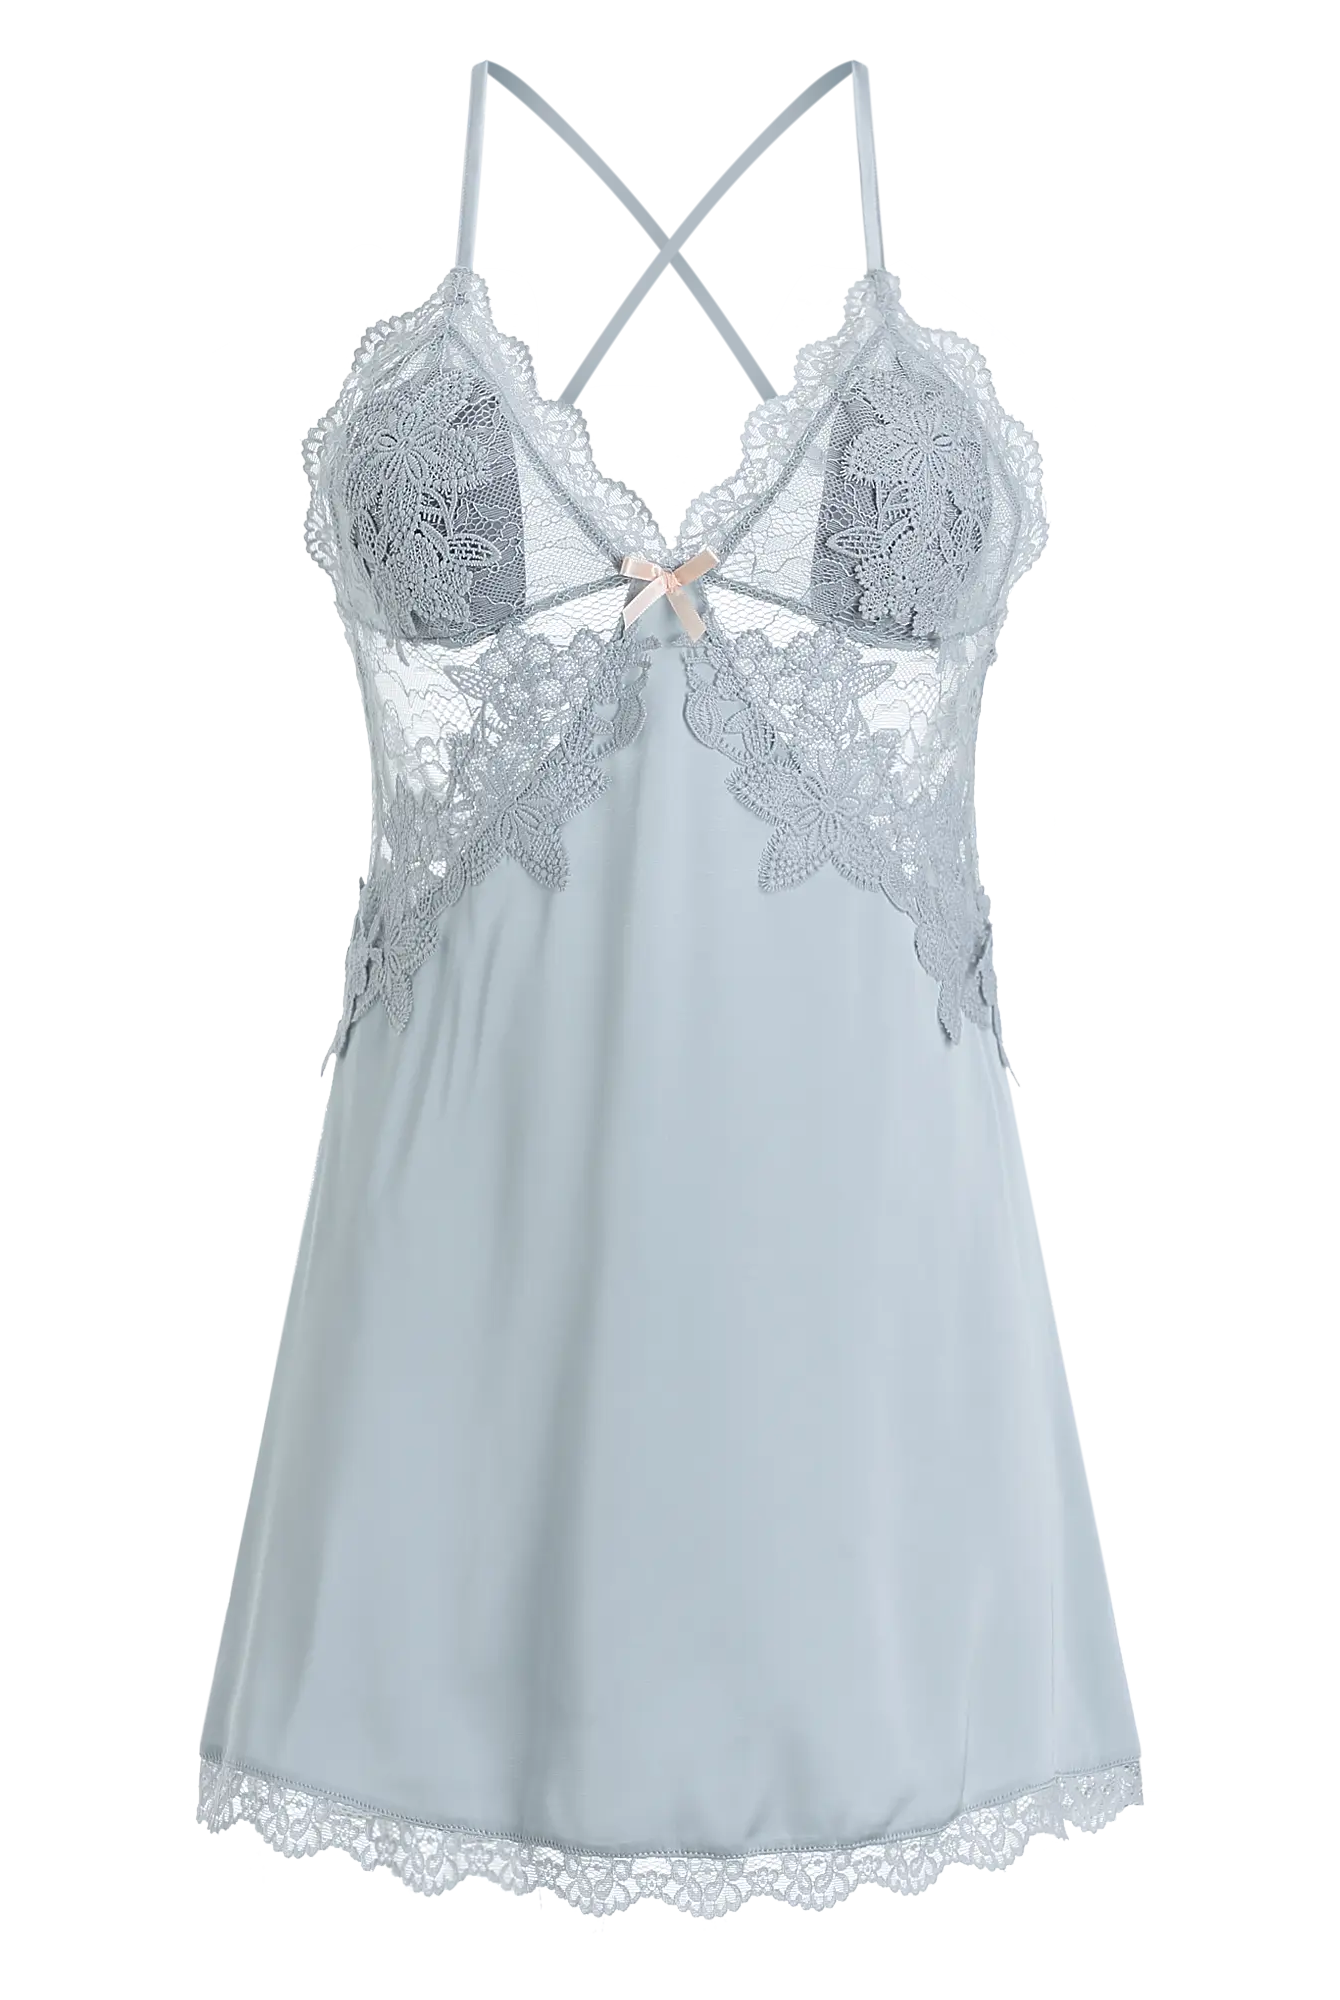 Satin Padded Strap Nightgown with Embroidered Lace Overlay Peach Passion